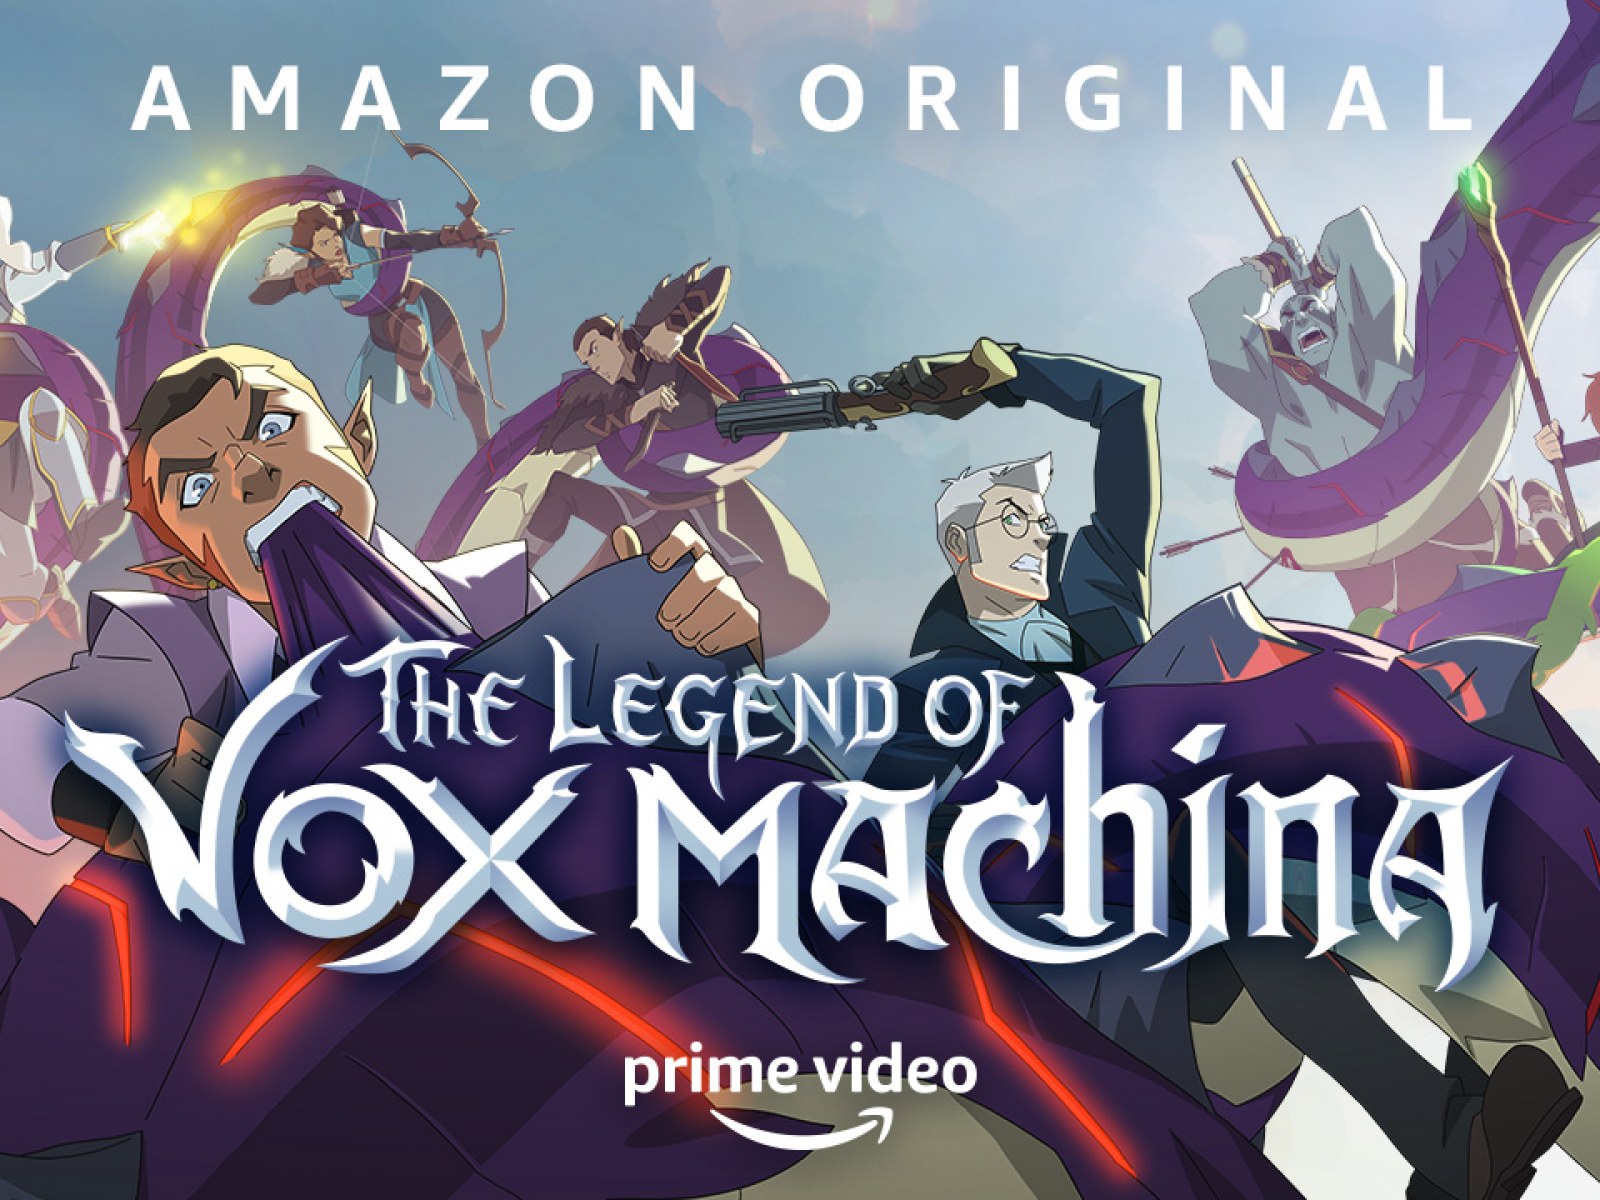 The Legend of Vox Machina' Character Guide: Who's Who in the New Prime Video Series